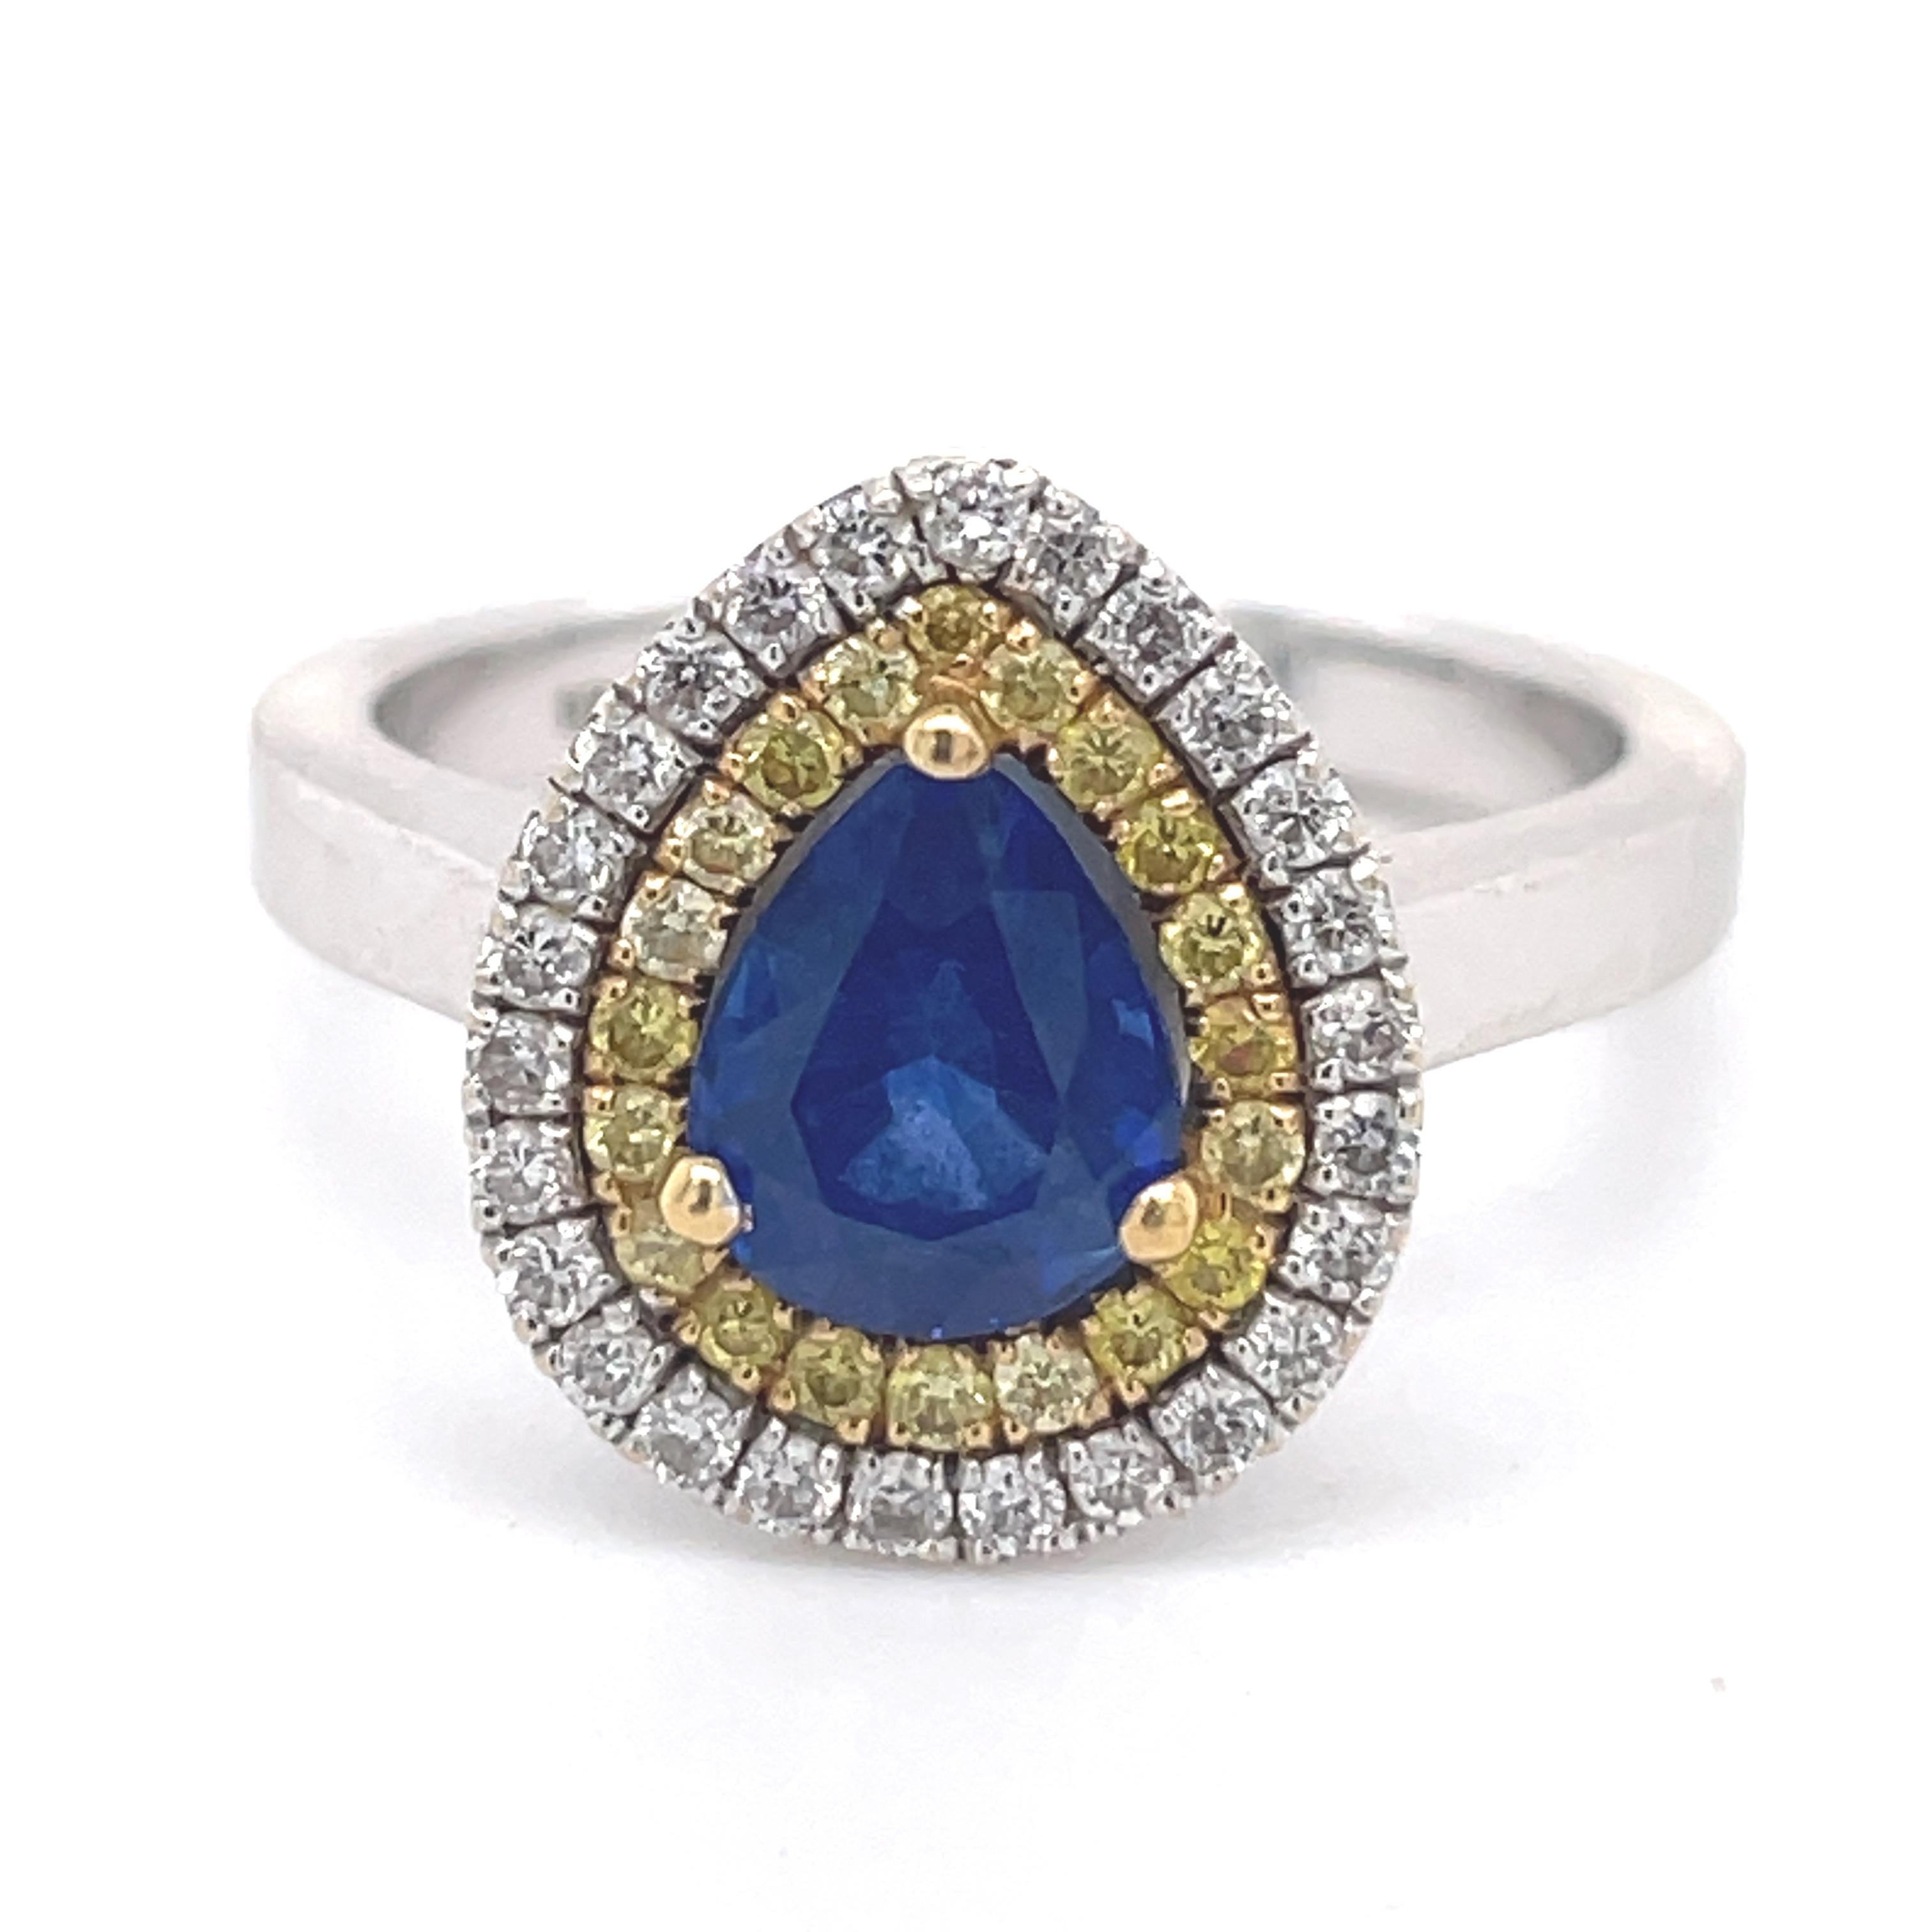 S e t t i n g ~~
Solid 18k White +Gold
5.94 grams
Ring 5.5 US
 
~~ Stones ~~


Main Stone:
Pear Shape Natural Sapphire In Weight Of 1.70 Ct (Approx.)
Color  - Blue


Side Stones:
Round Shape Natural Diamonds In Weight Of 0.20 Ct (Approx.)
Color  -